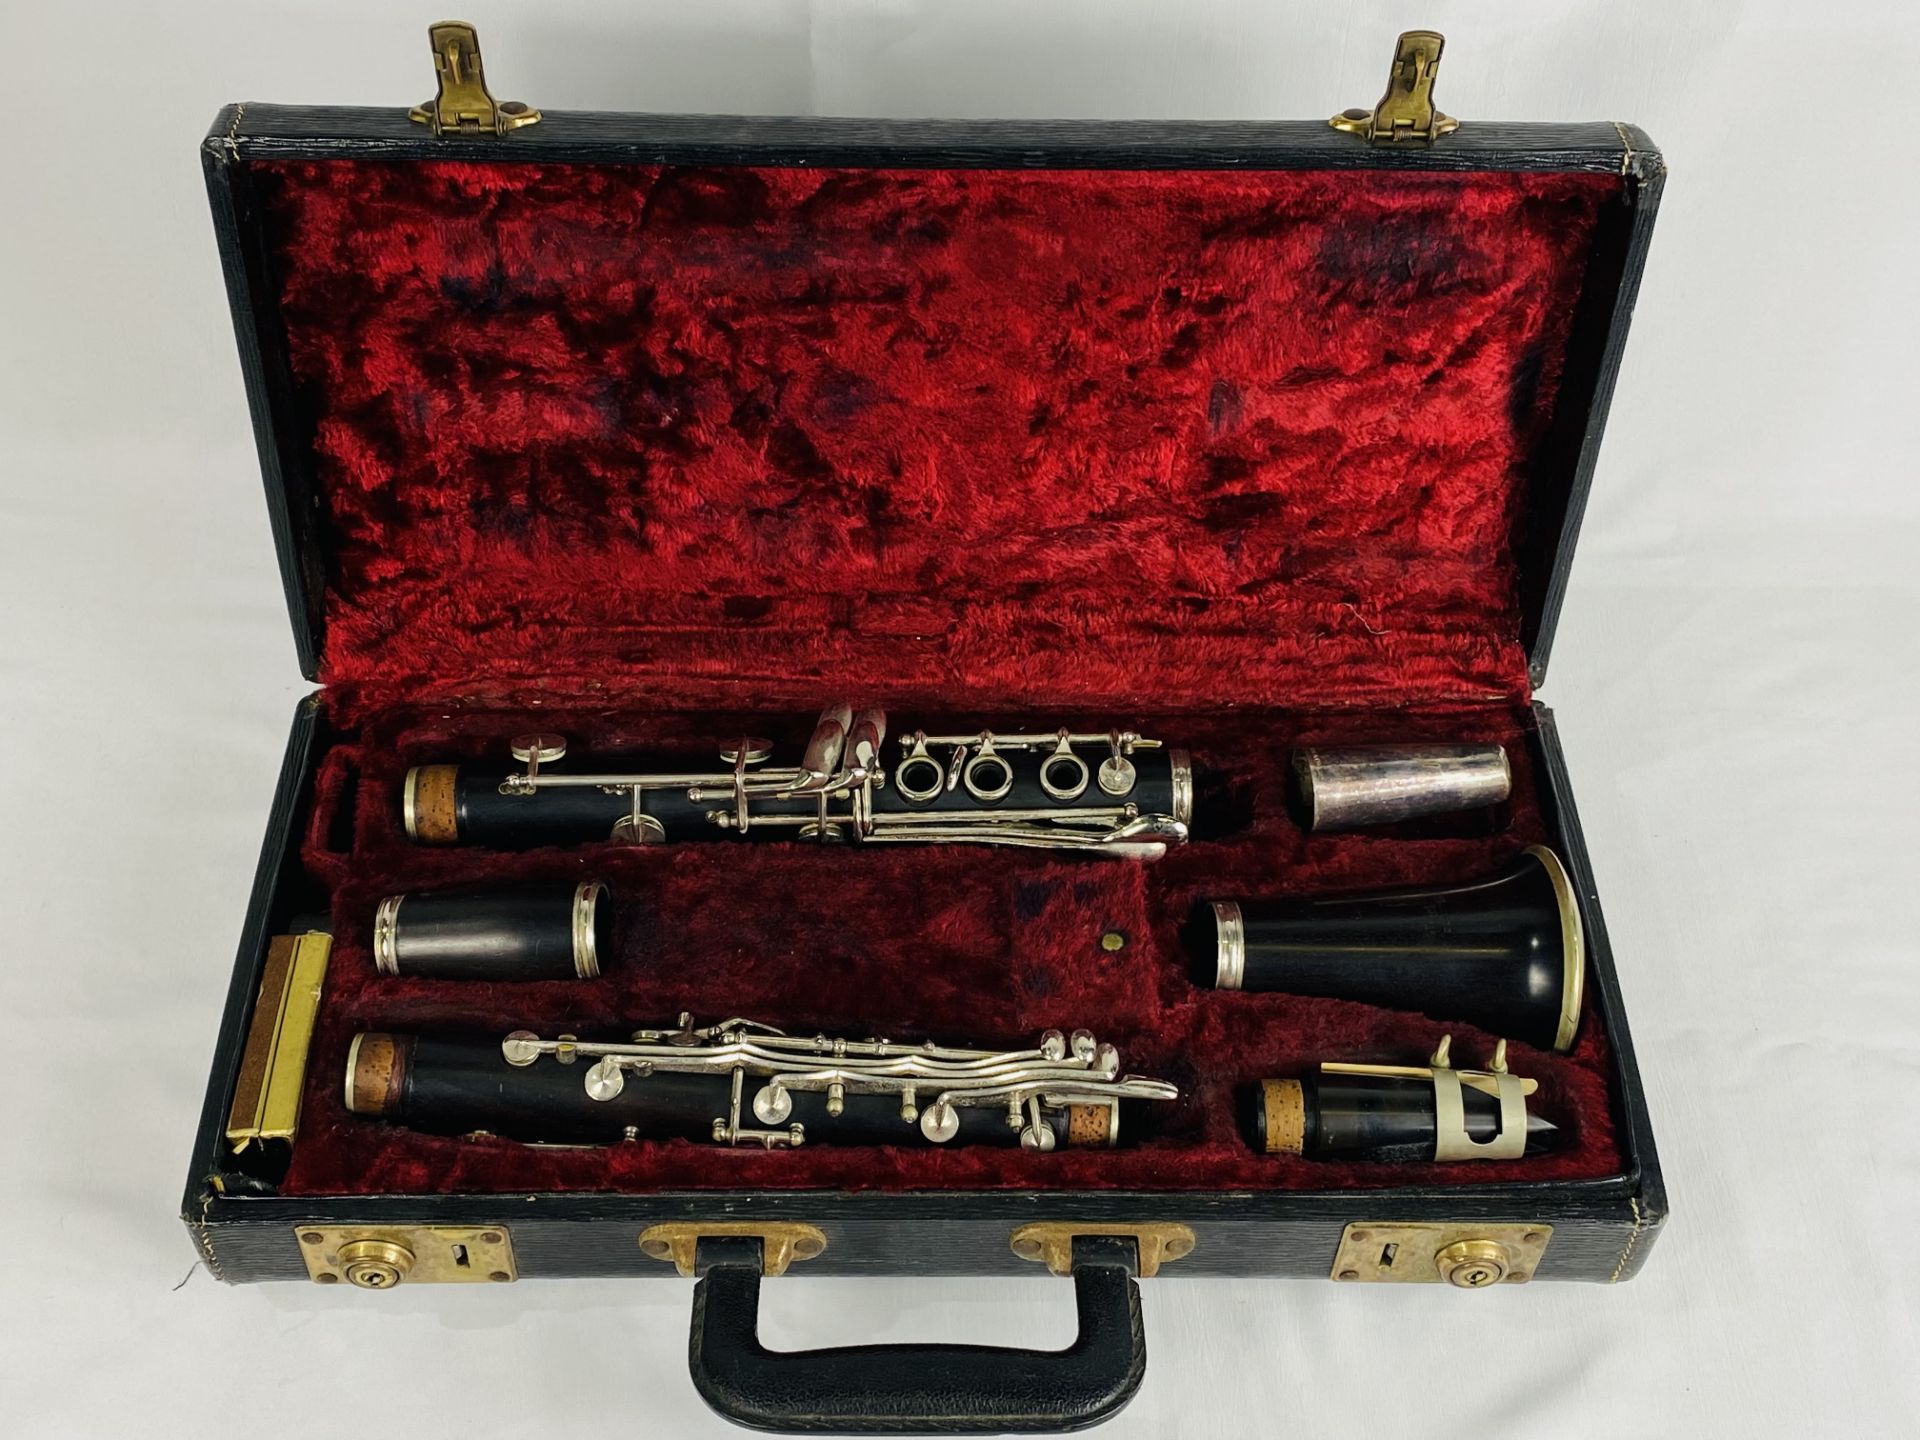 Besson clarinet in box. - Image 2 of 4